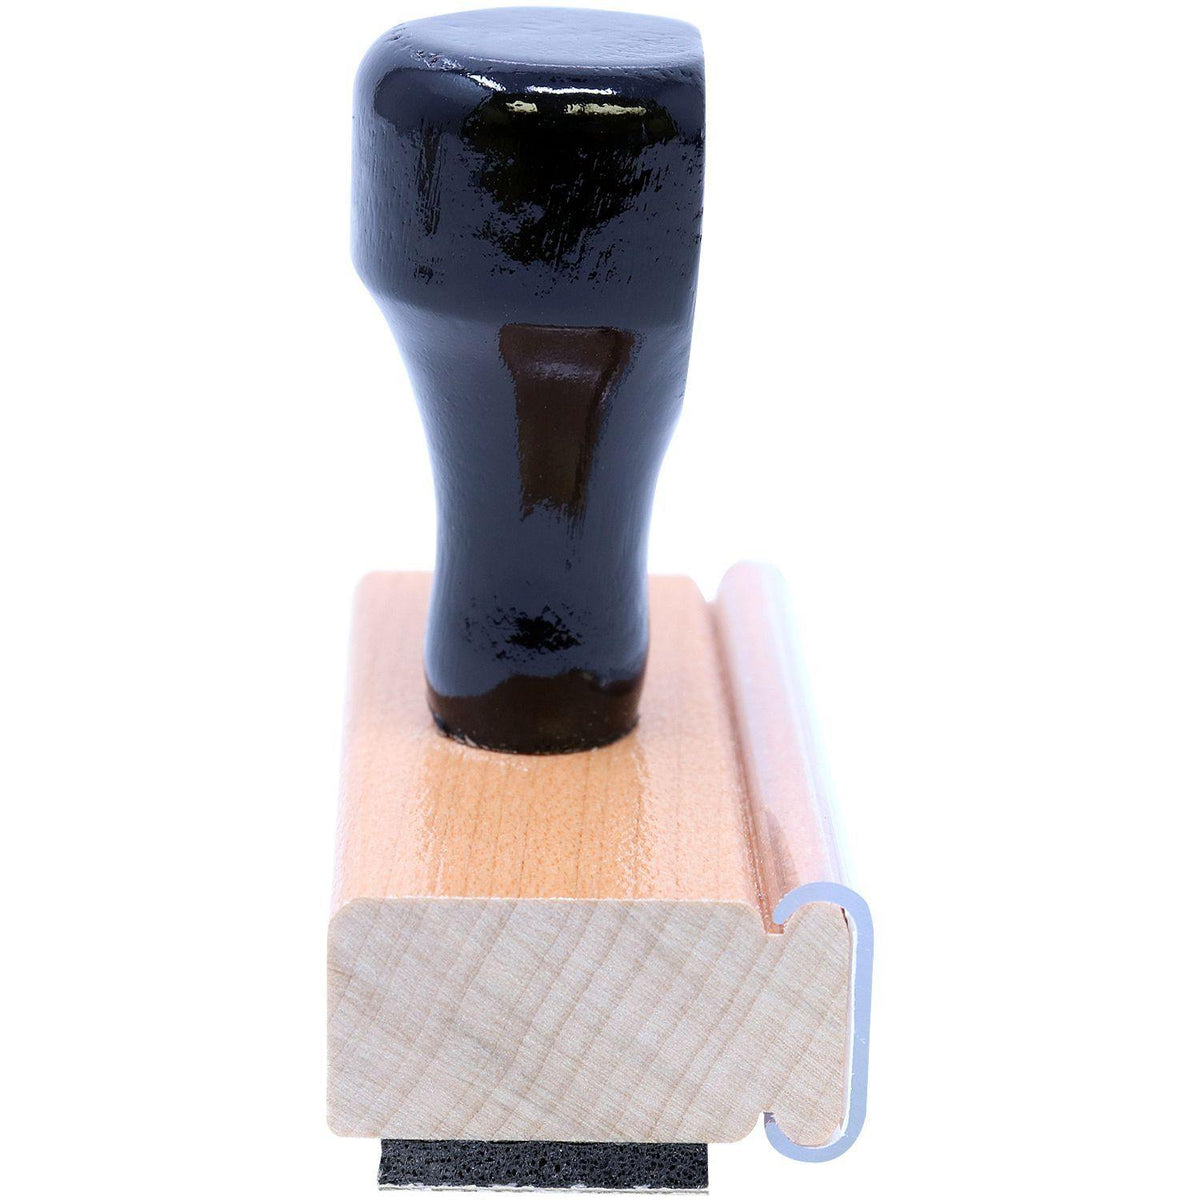 Revisado Rubber Stamp - Engineer Seal Stamps - Brand_Acorn, Impression Size_Small, Stamp Type_Regular Stamp, Type of Use_General, Type of Use_Office